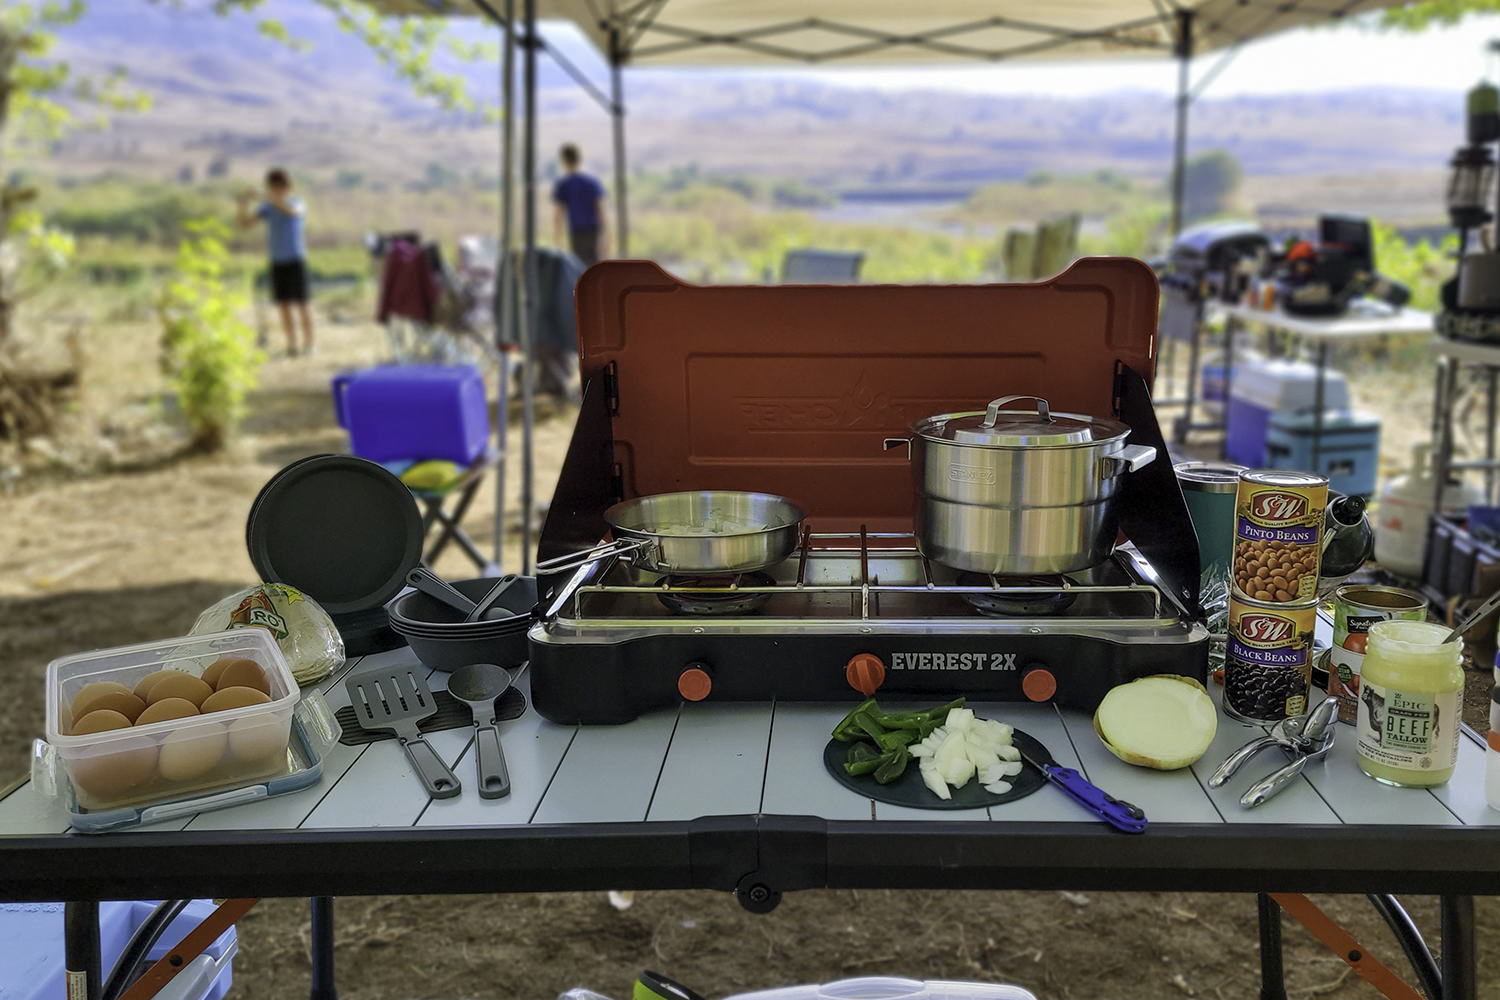 The Stanley Adventure Base Camp 4 Cookset with the Camp Chef Everest 2x stove on a table in a campsite